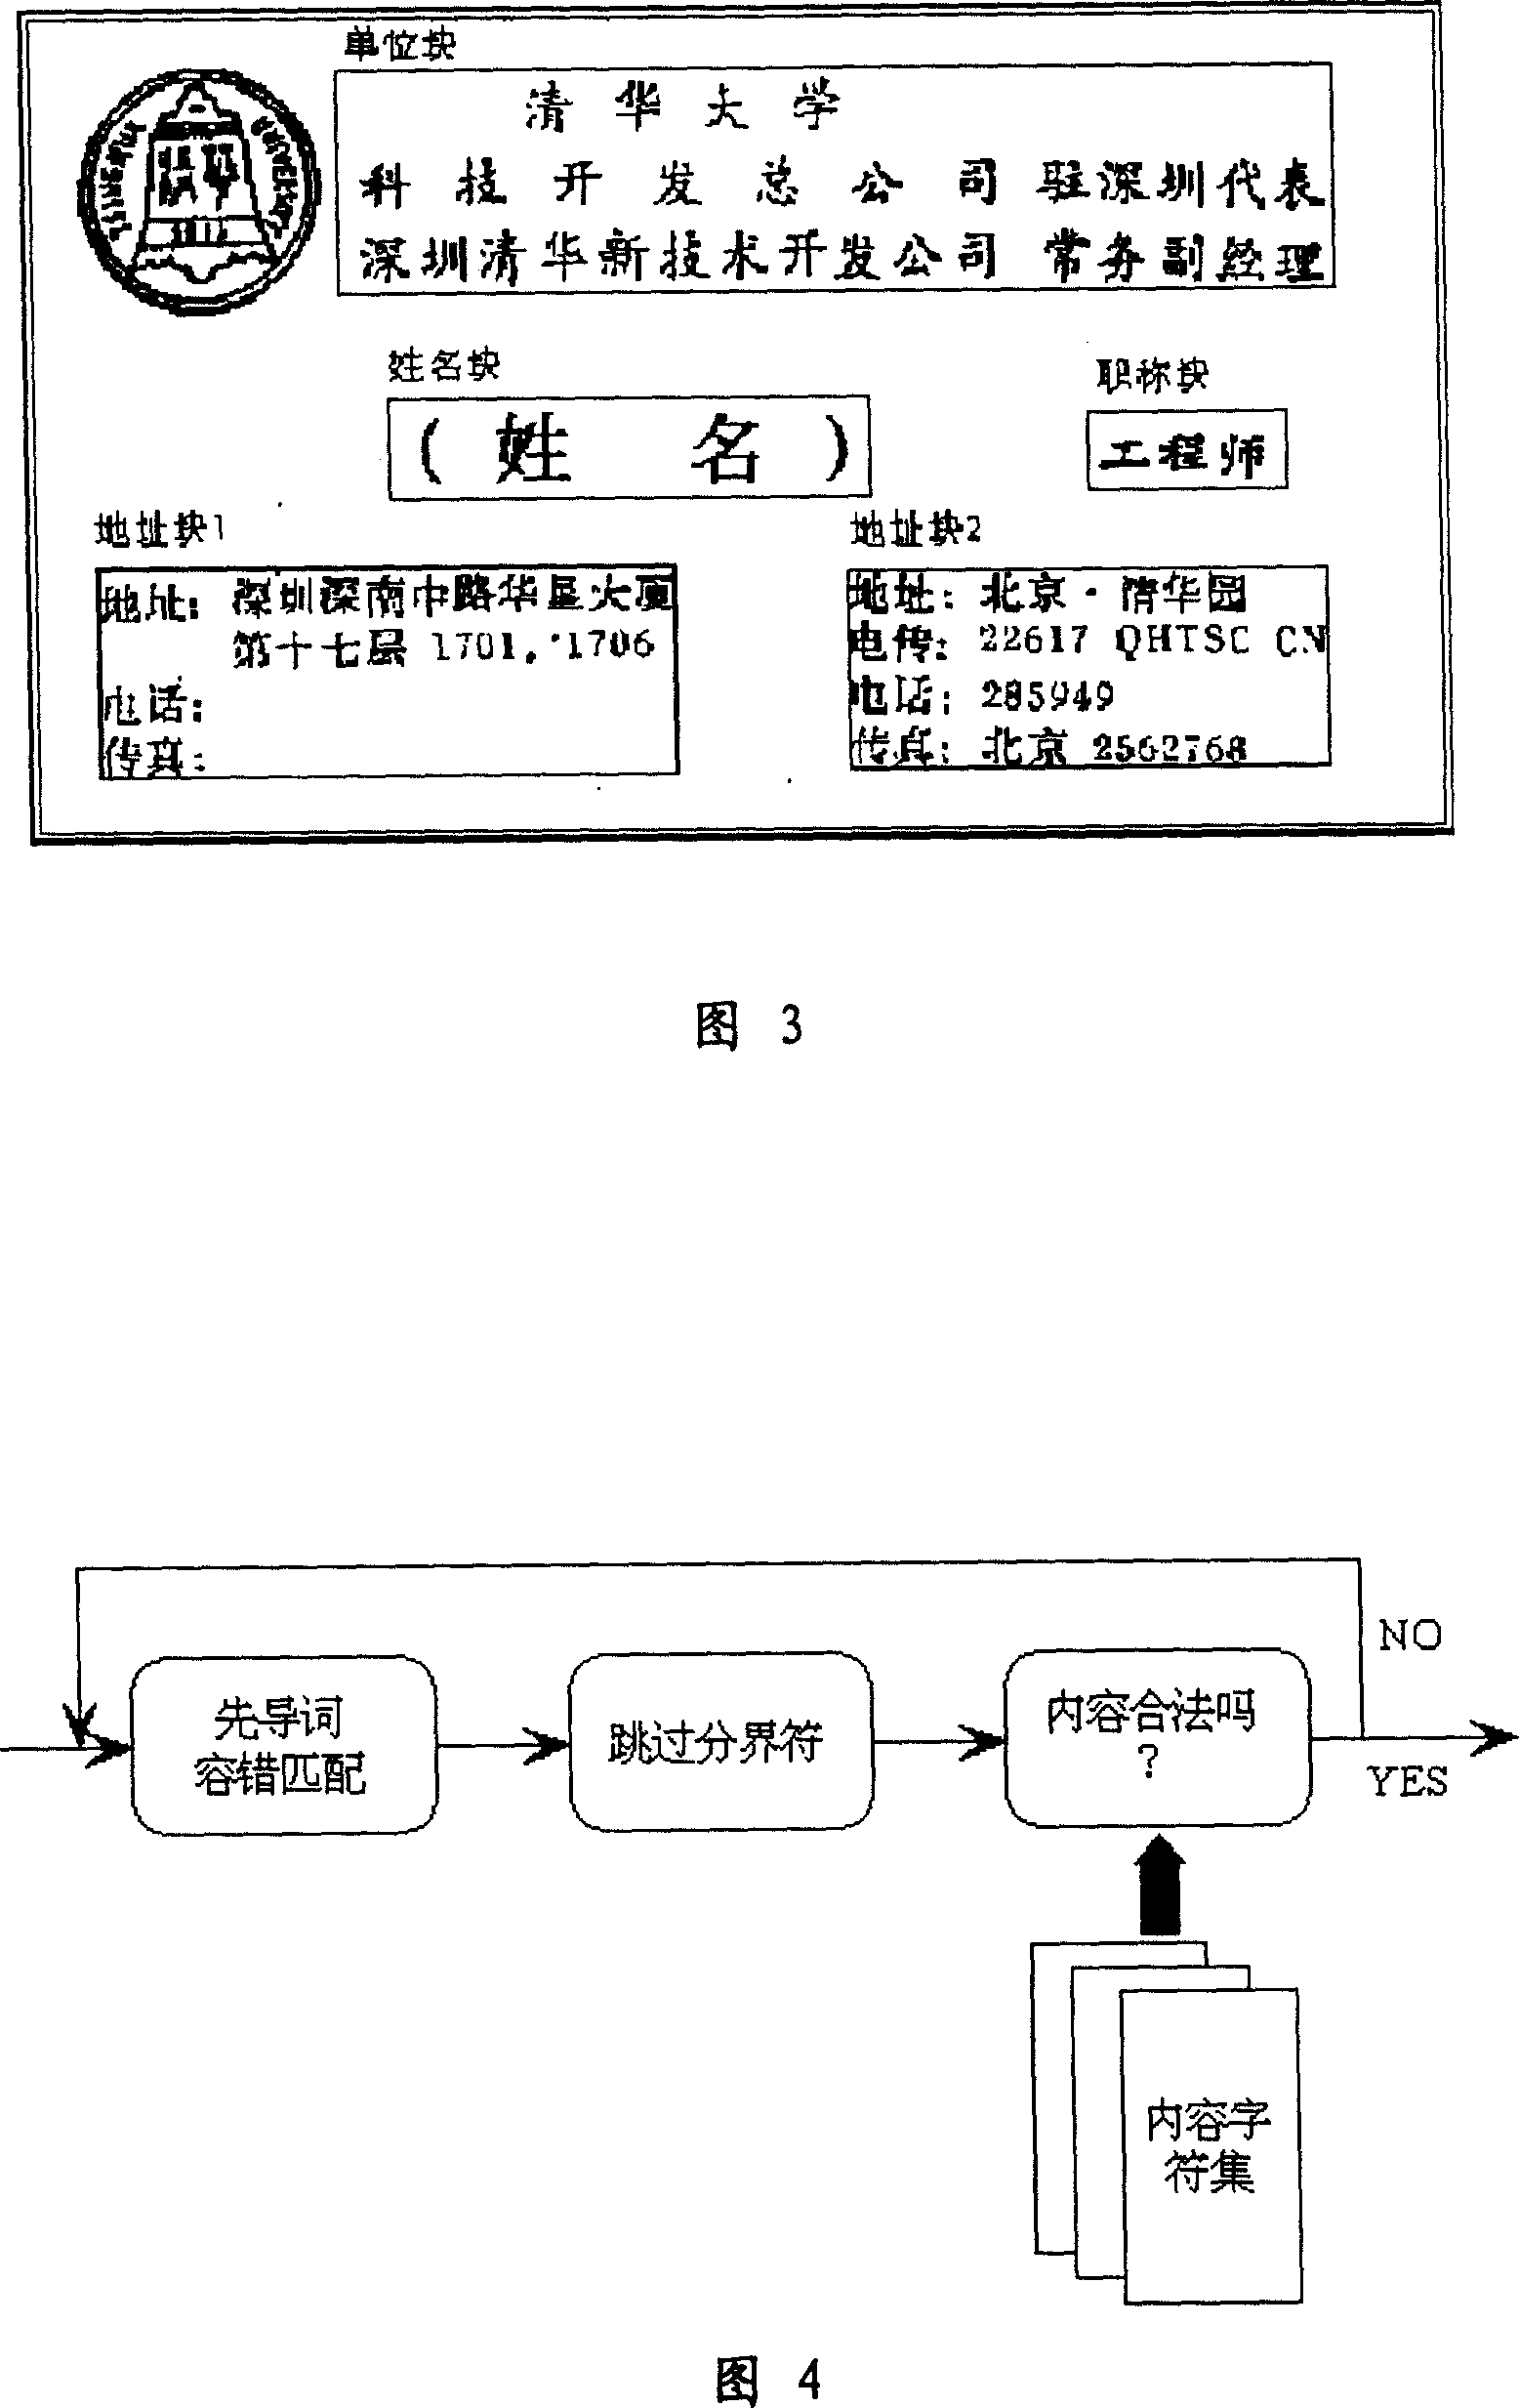 Method for gathering and recording business card information in mobile phone by using image recognition